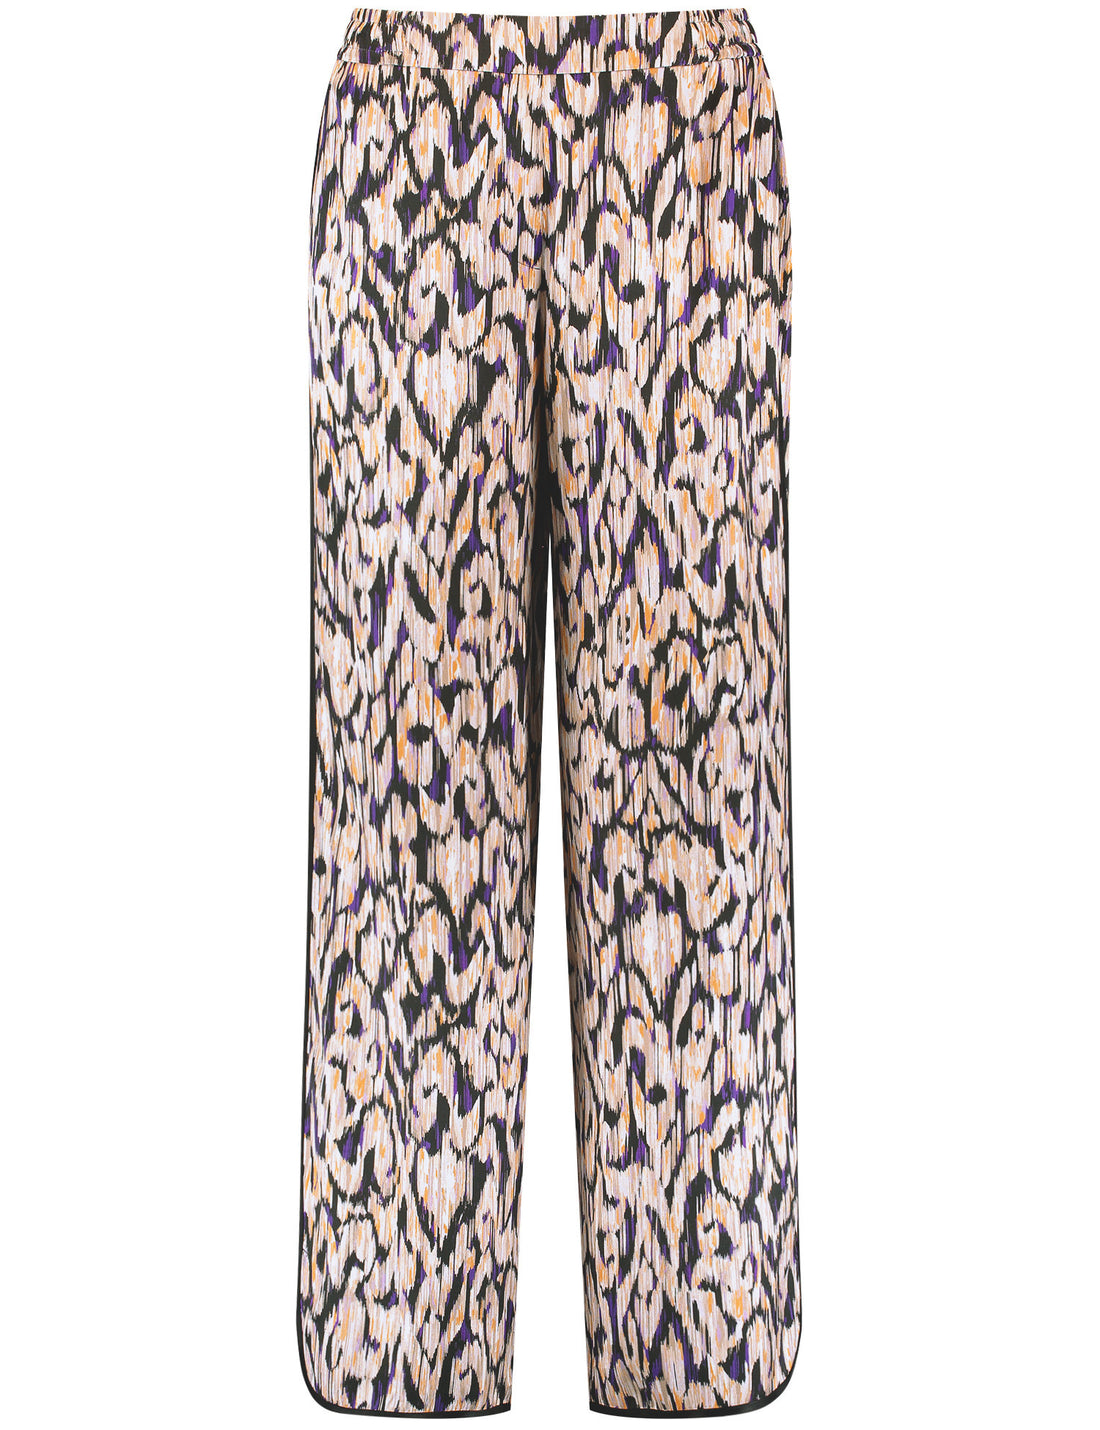 Patterned Slip-On Trousers_02